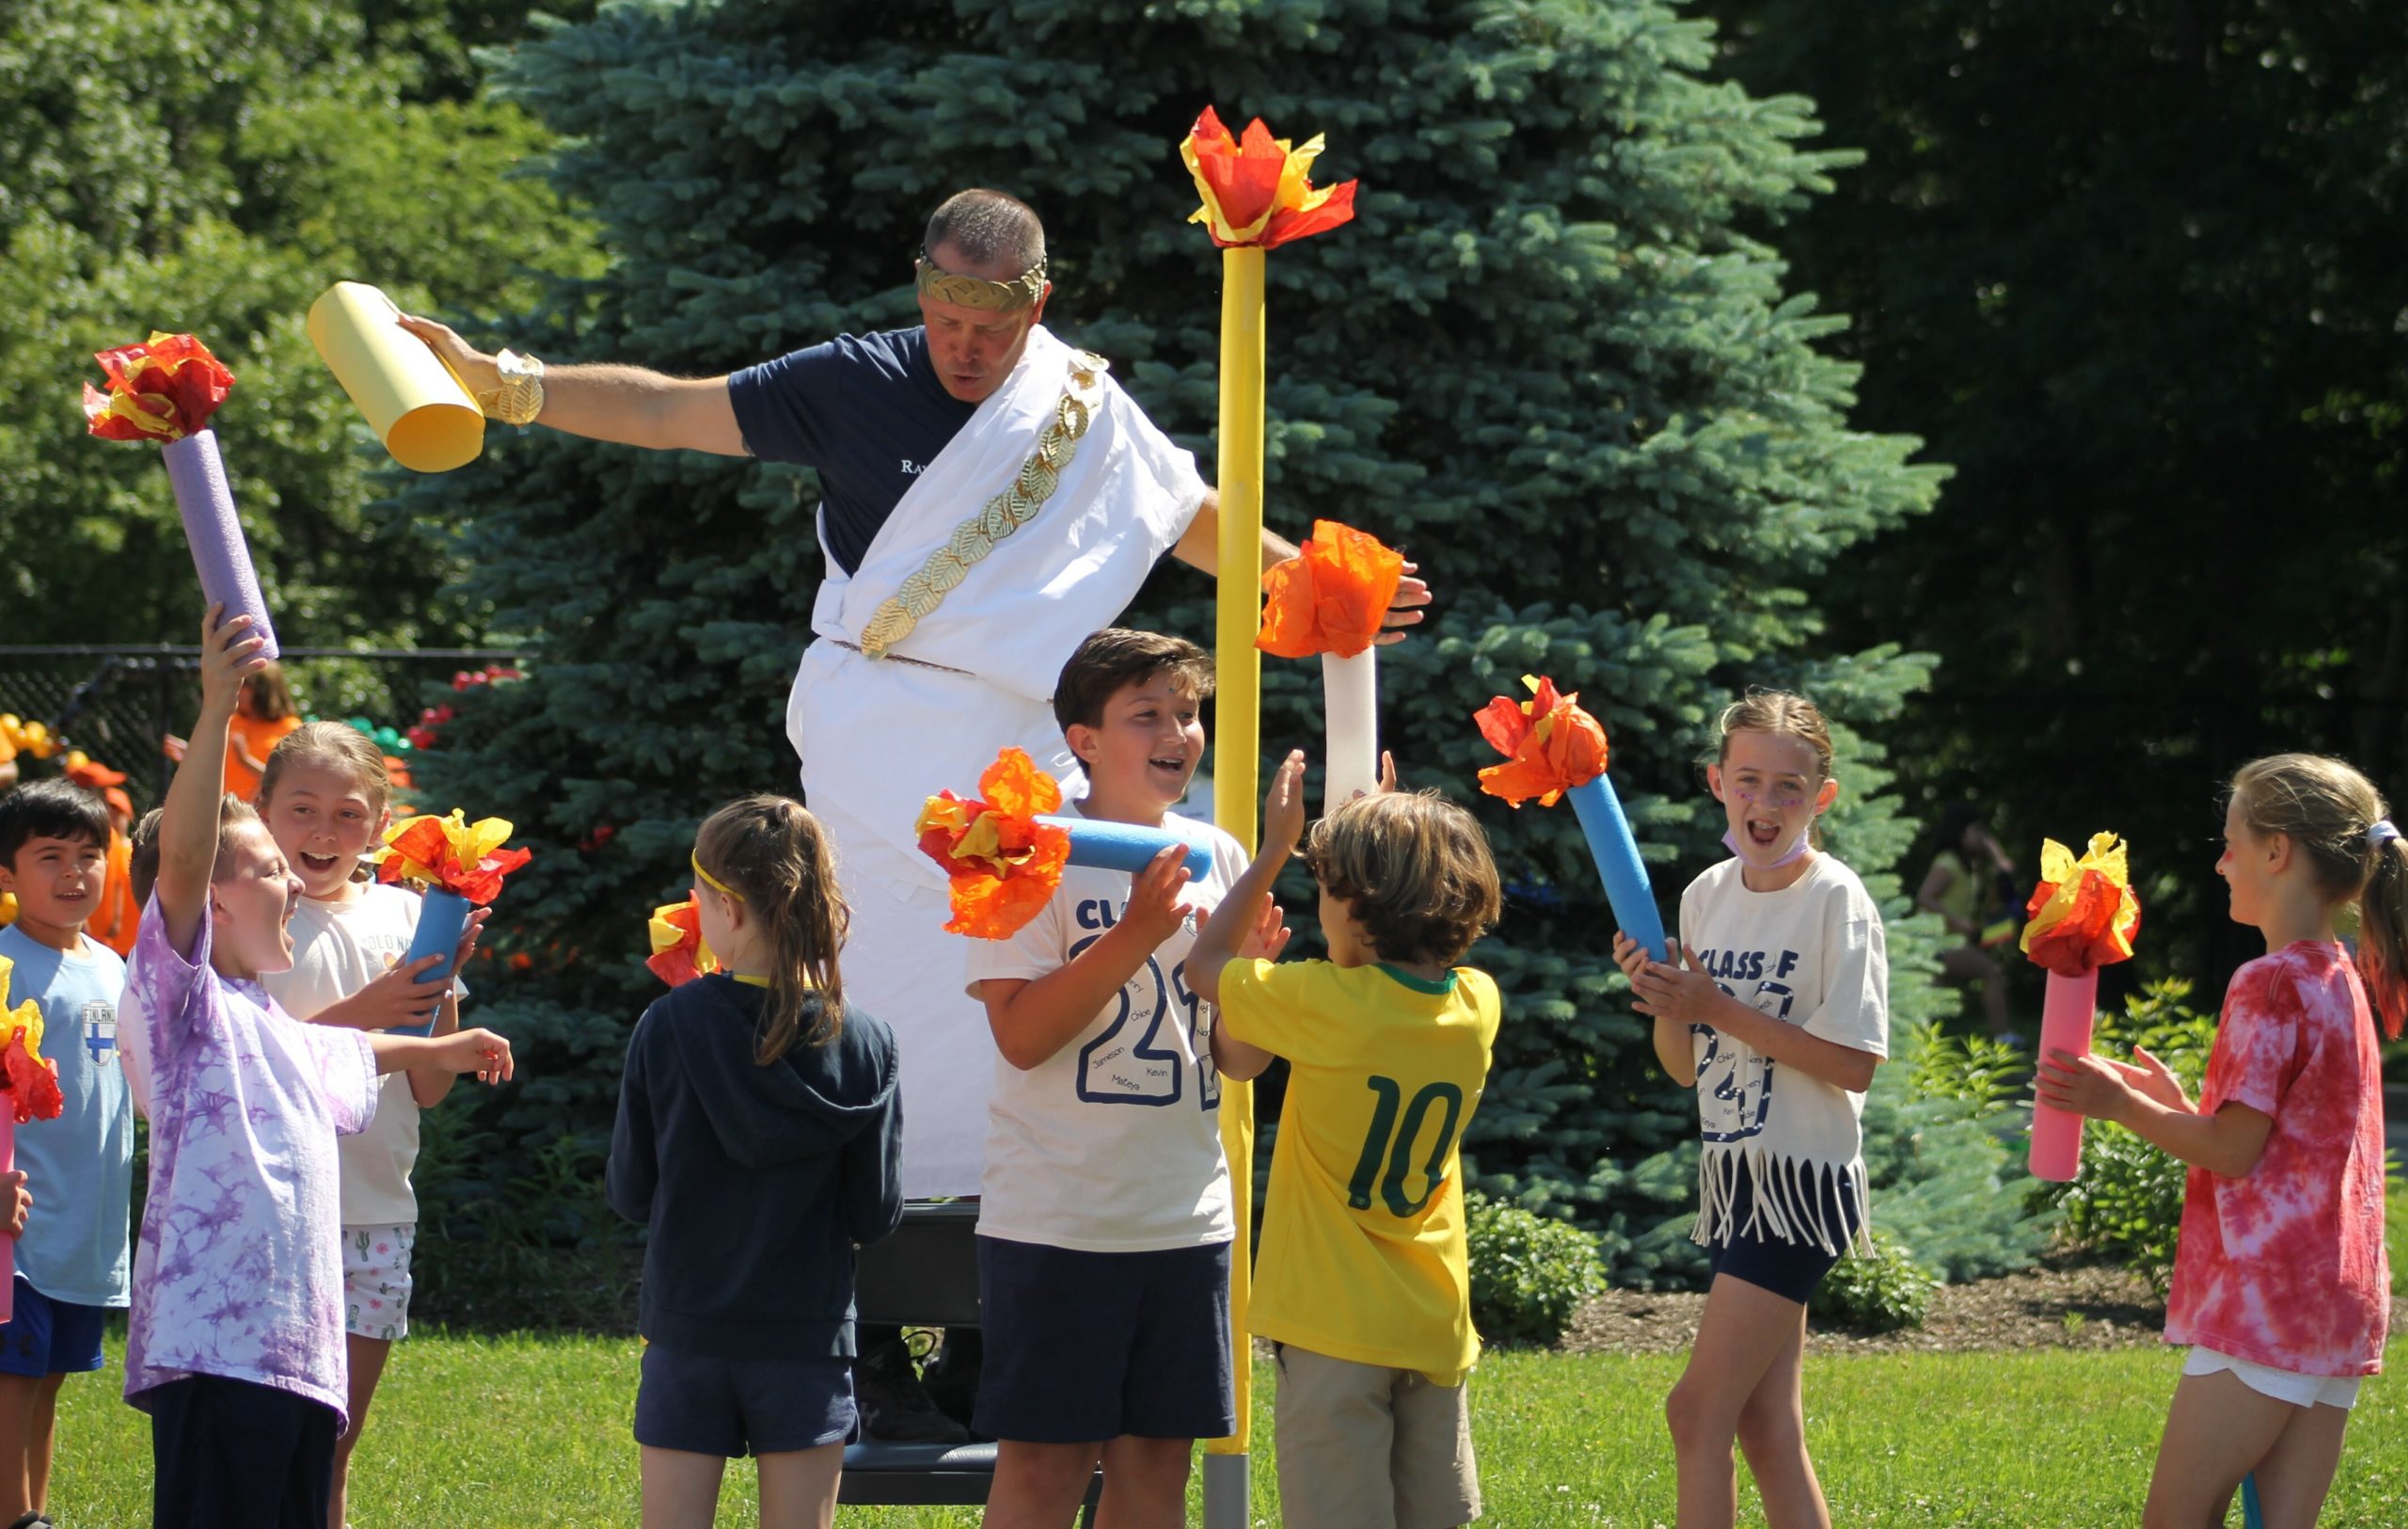 PE Coach, Erik Broskie, celebrates with students once the torch is lit during Raynor Country Day School's Olympic Field Day event.